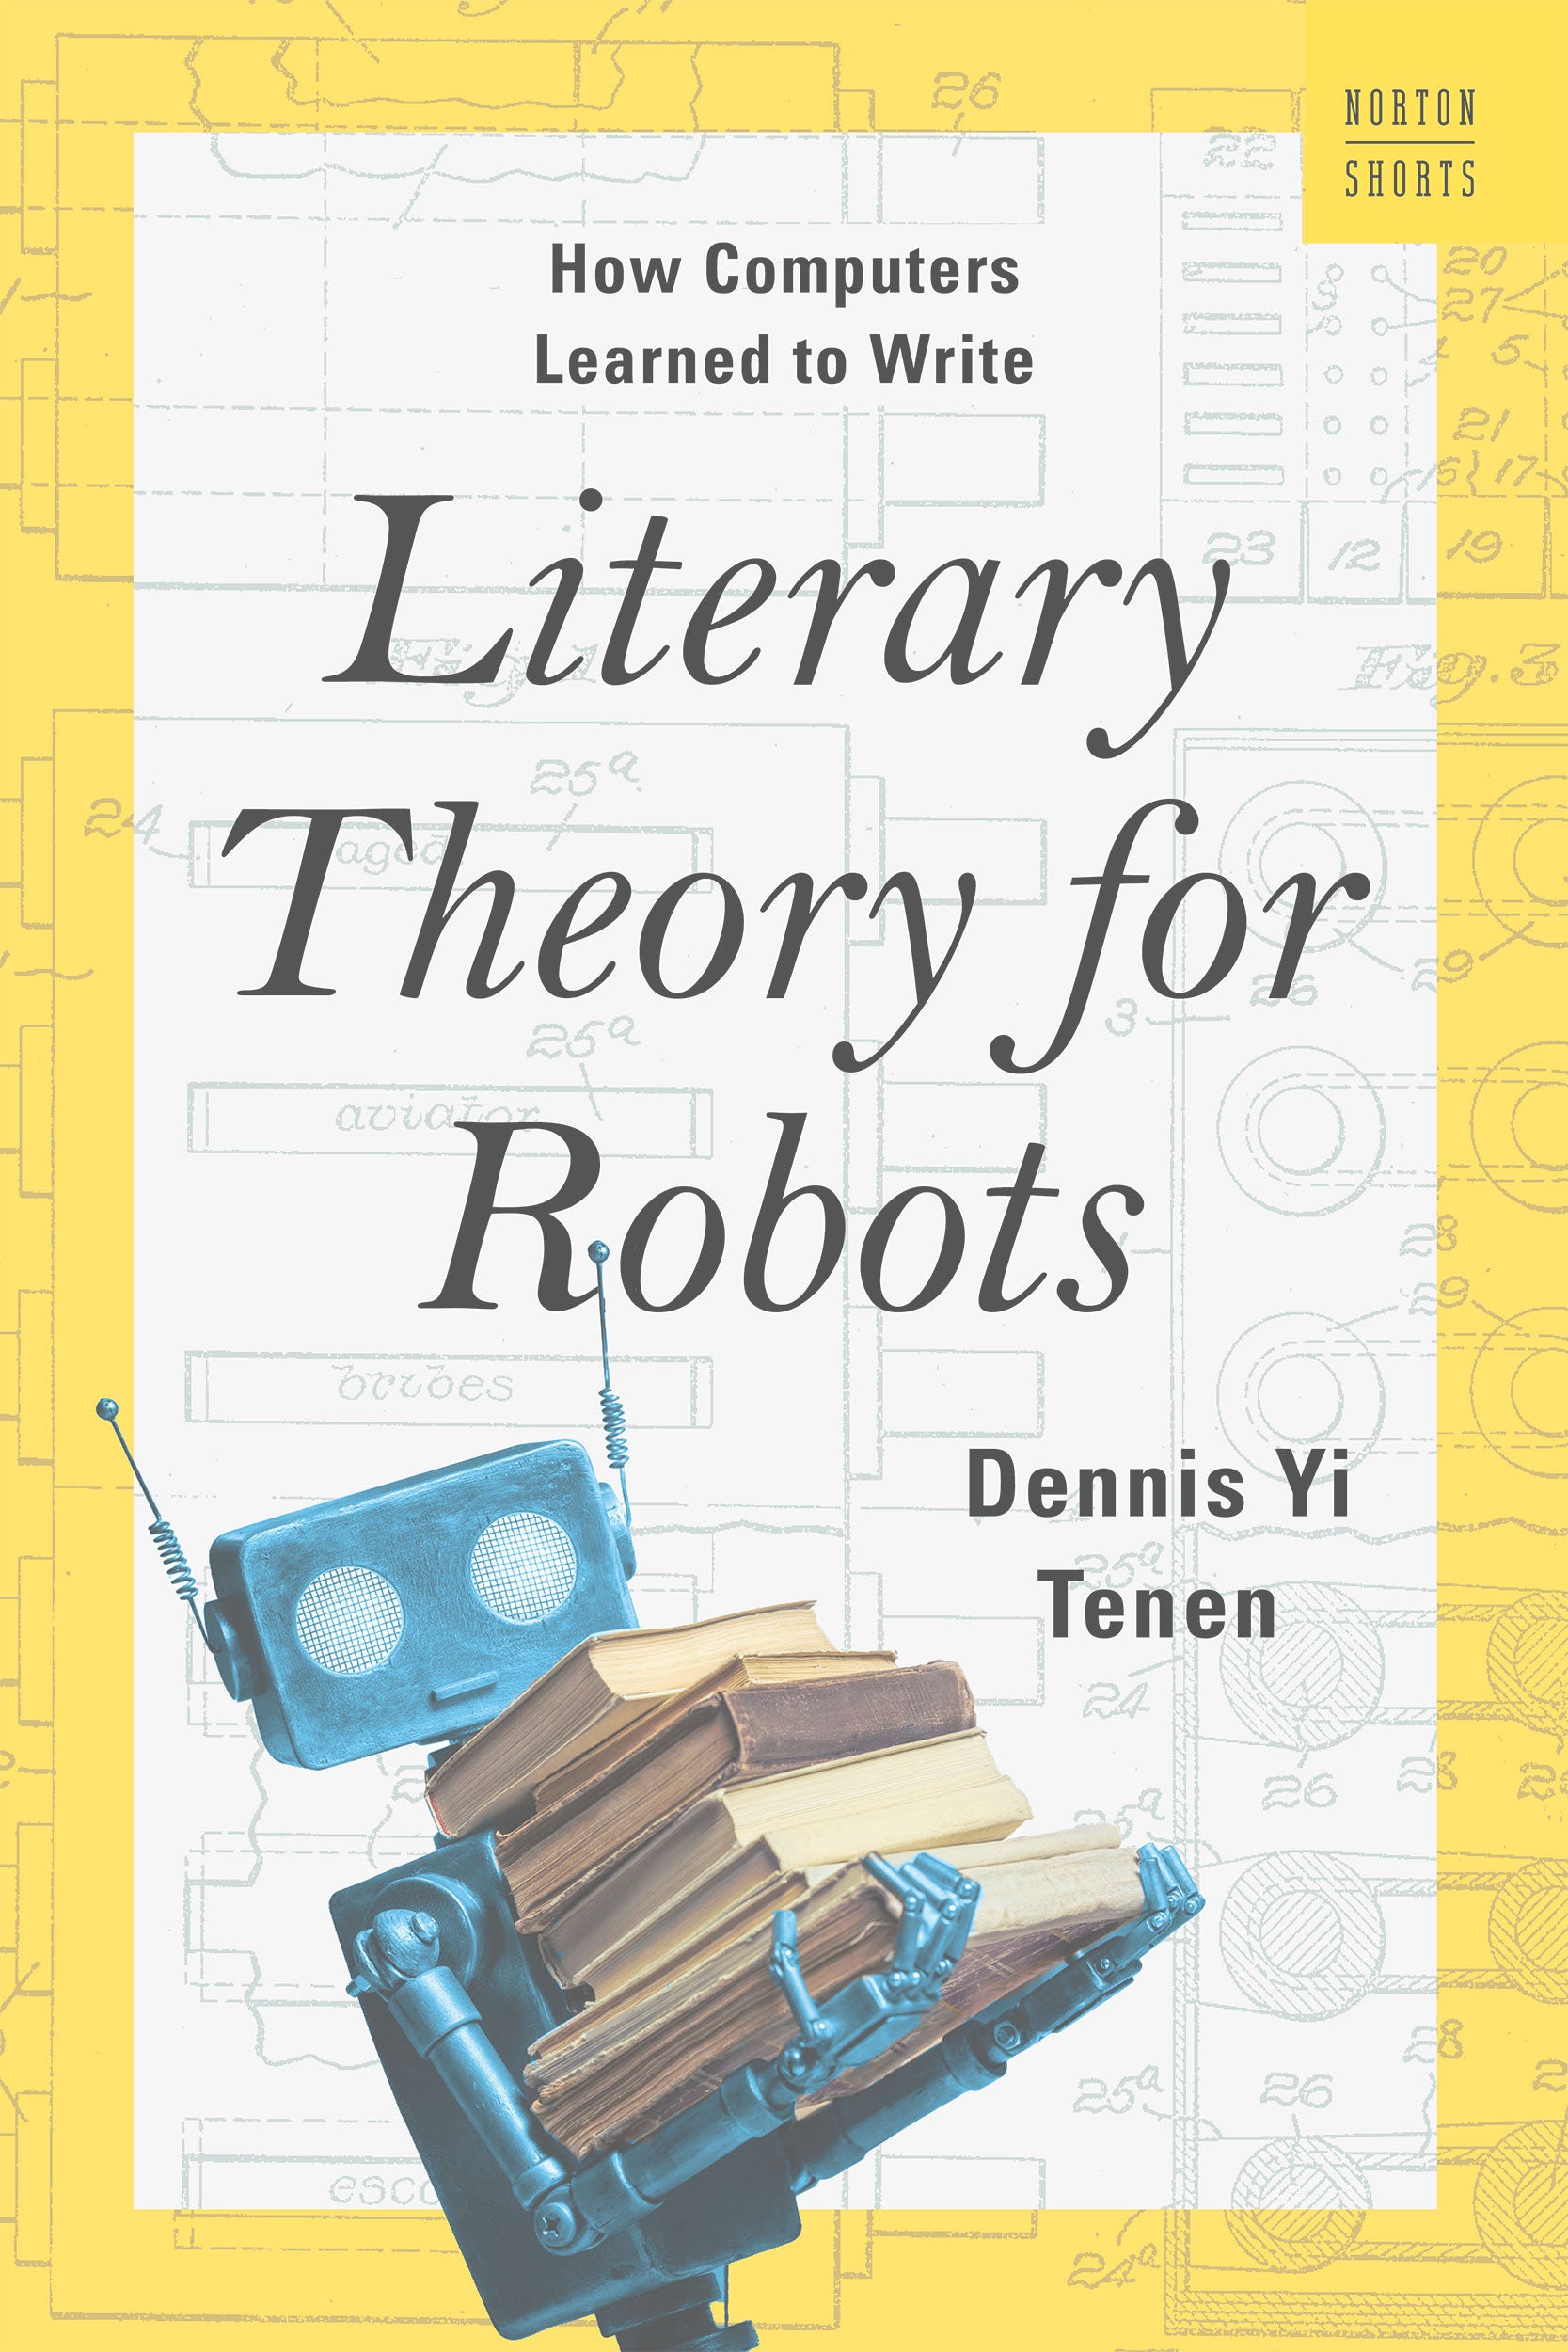 Cover of book with a robot computer carrying a stack of books.